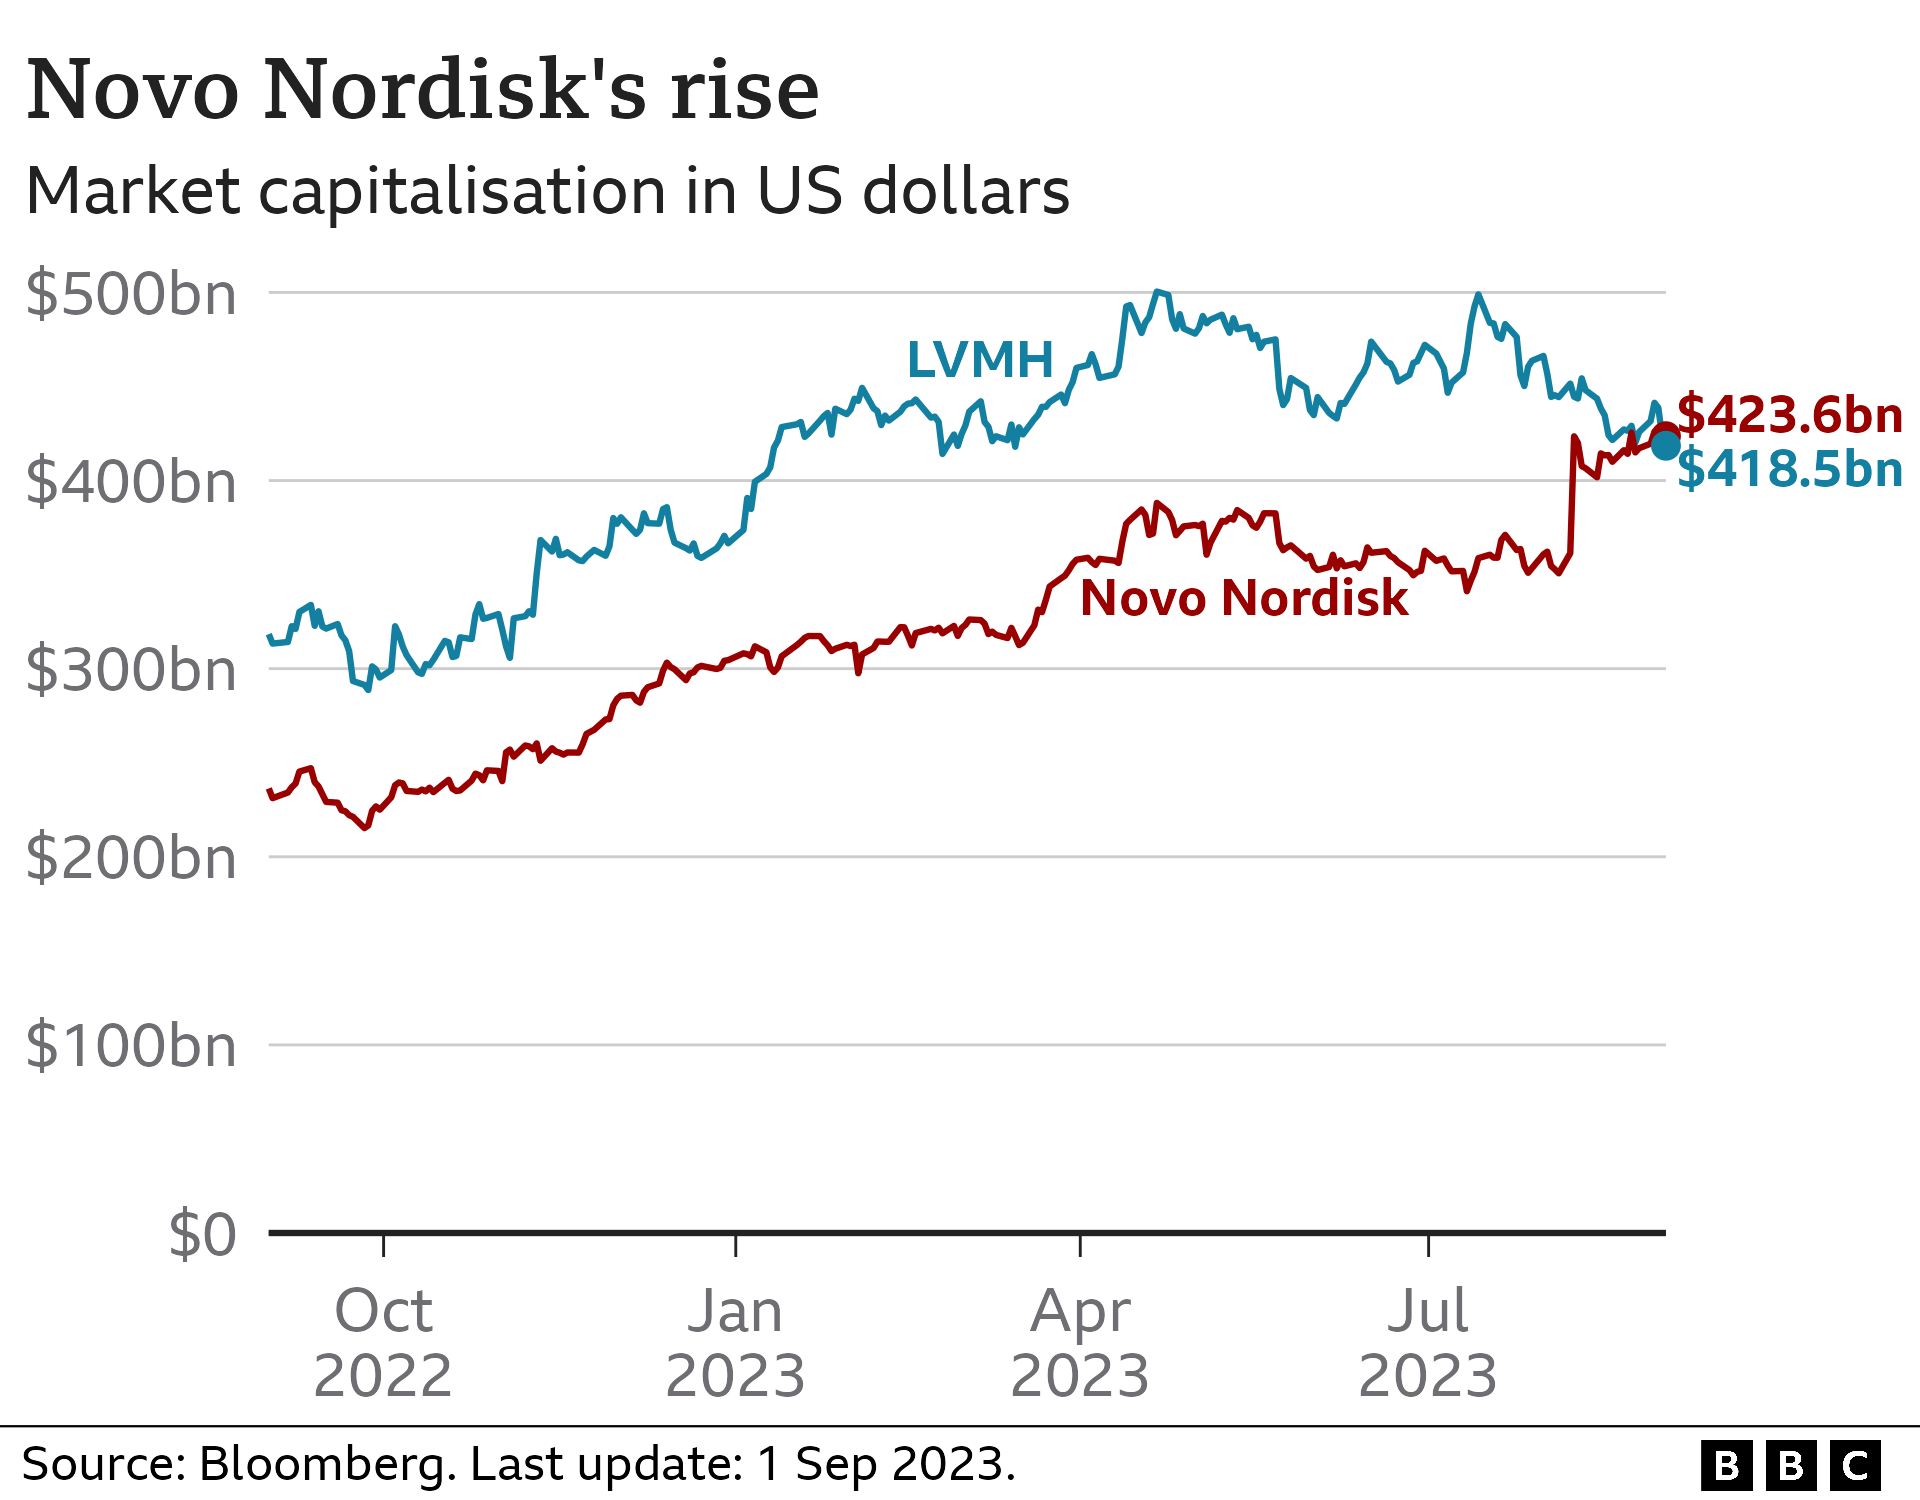 Line chart showing the total market capitalisation of Novo Nordisk at $423.6bn, having recently overtaken LVMH to become the most valued company in Europe.